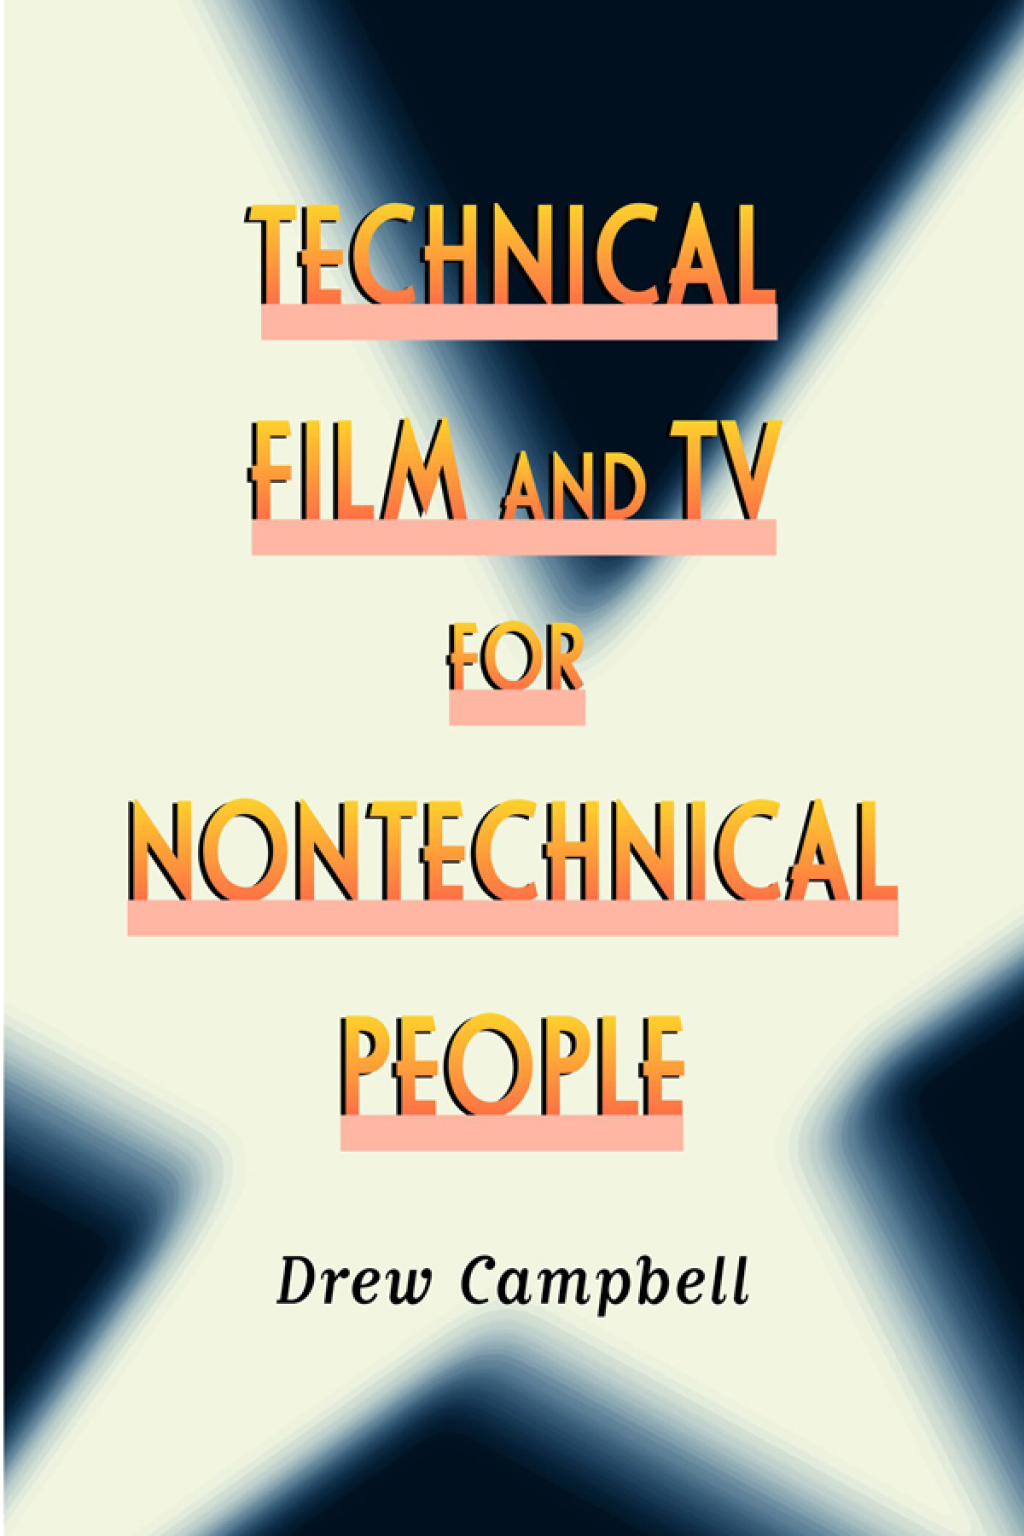 Technical Film and TV for Nontechnical People (eBook) - Drew Campbell,